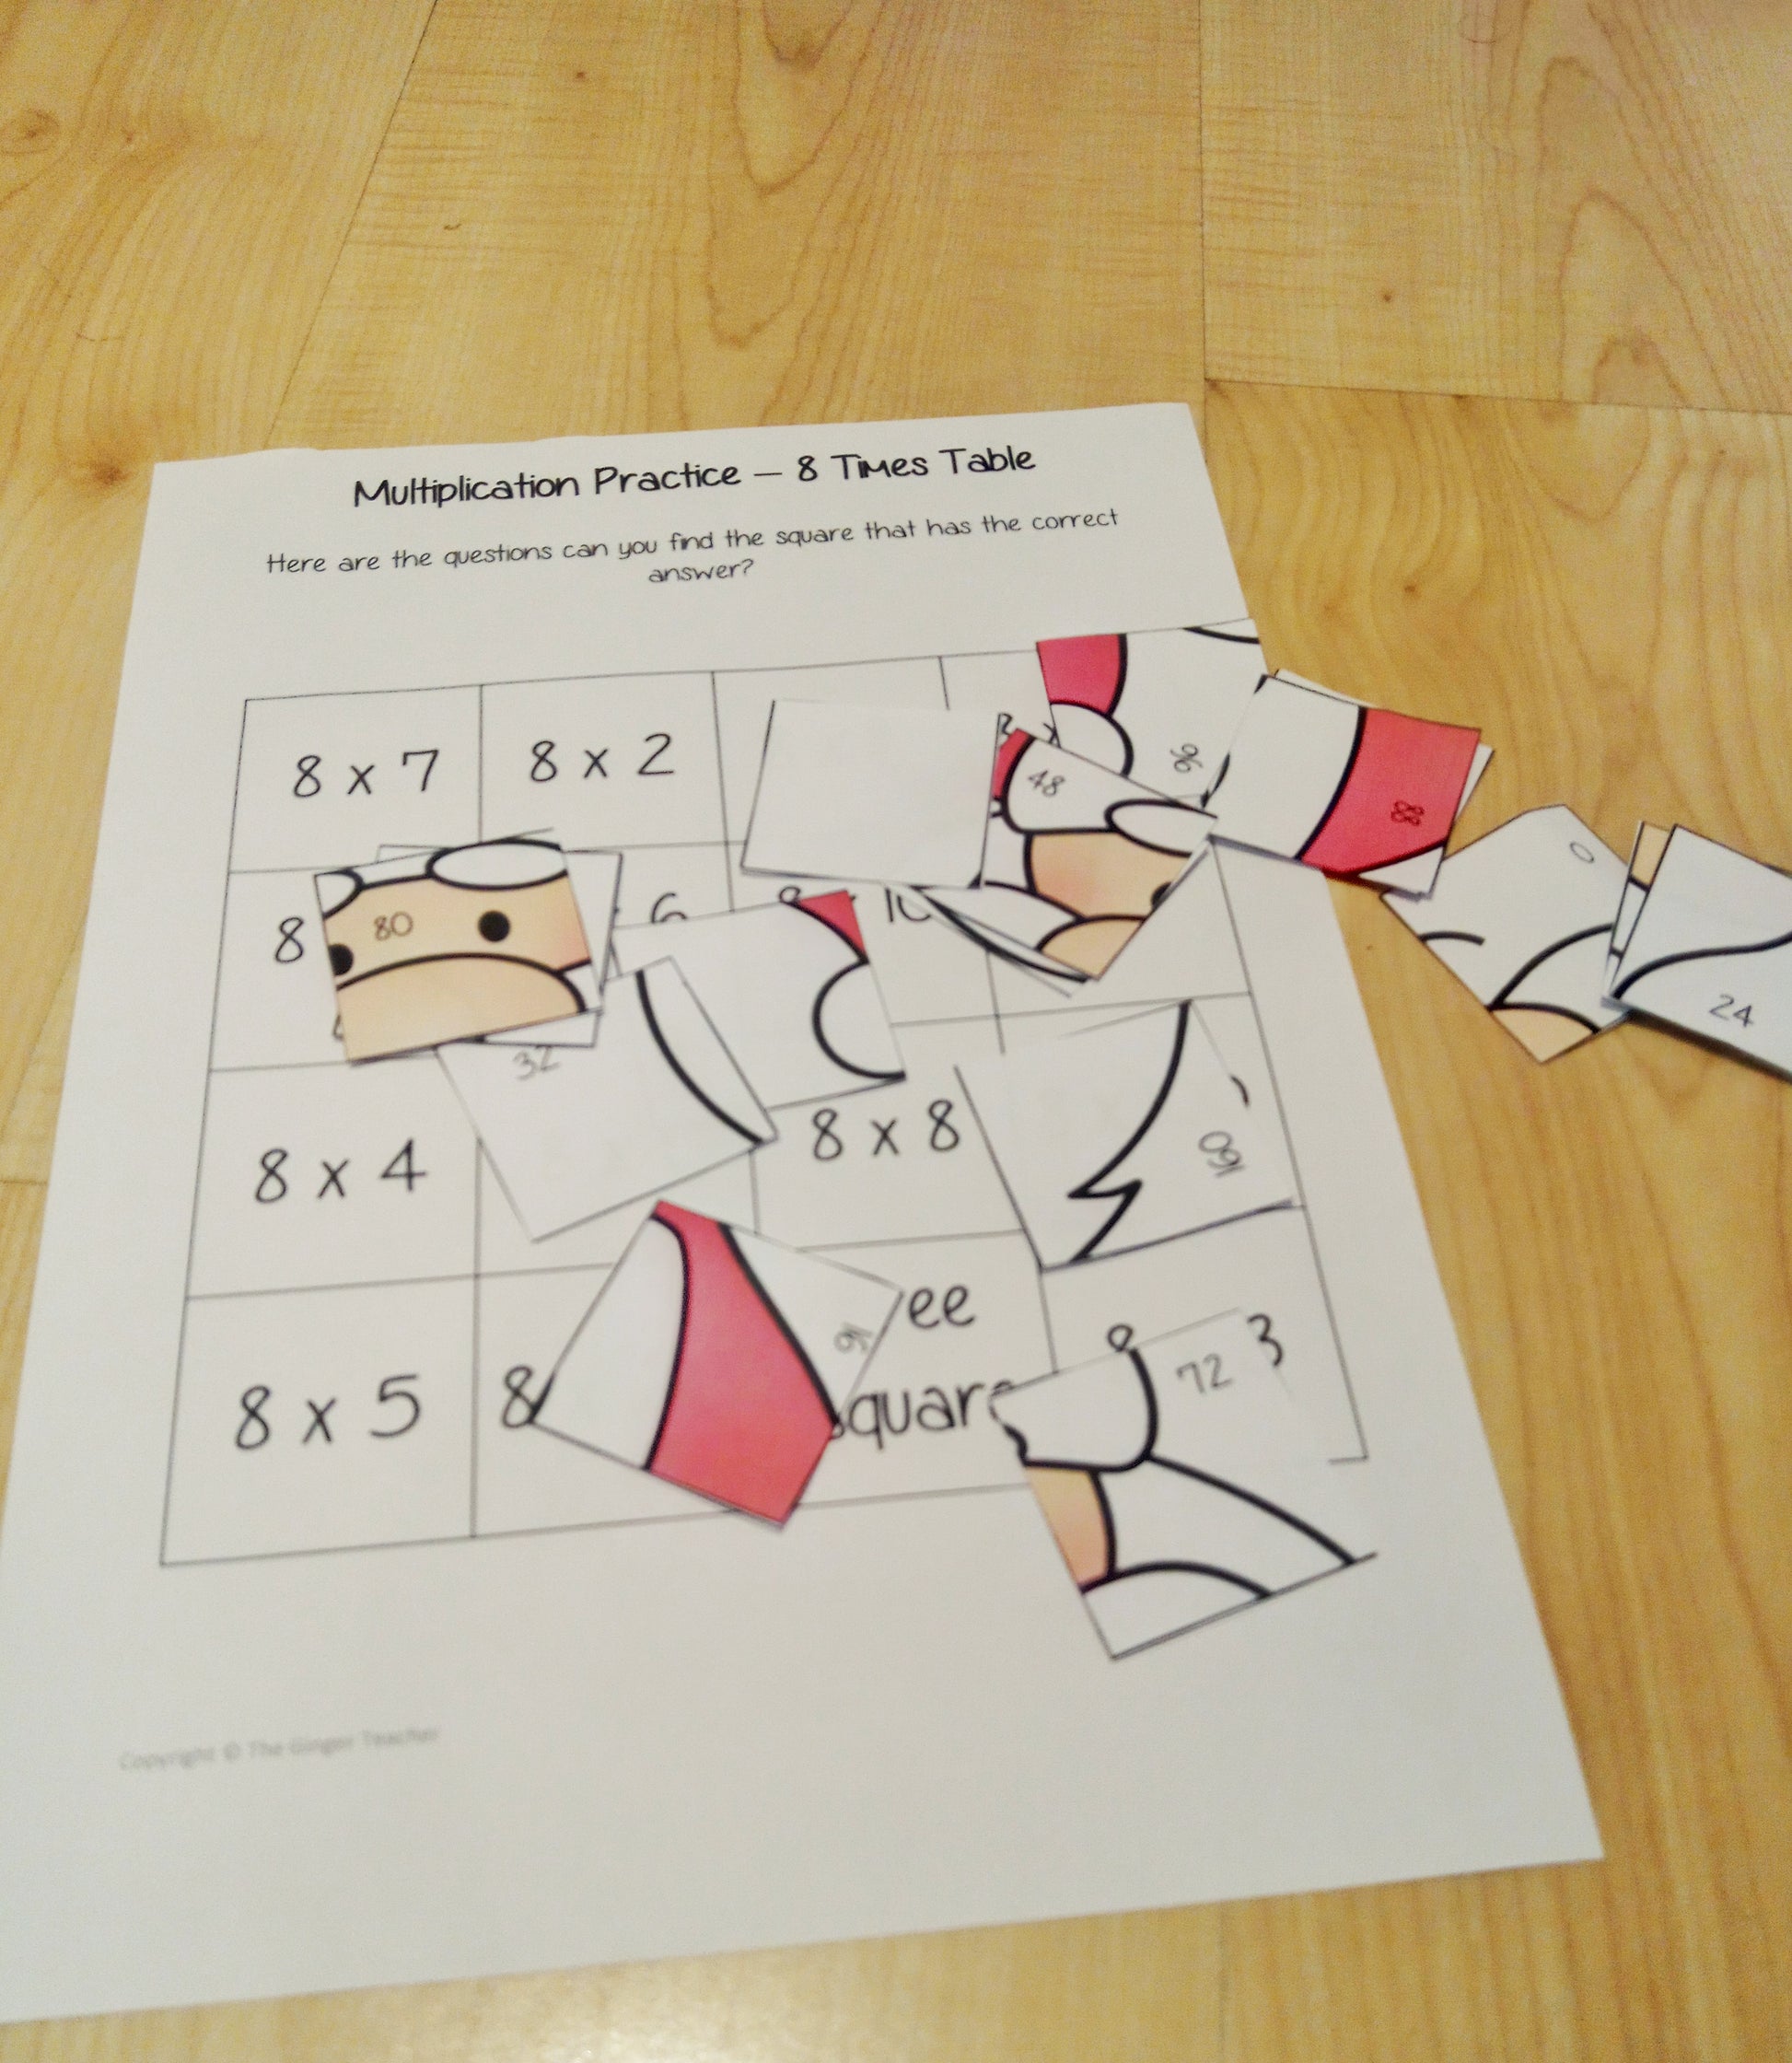 Christmas Themed Independent Multiplication Revision Sheets 8x No Prep independent revision activity for the eight times tables. Children have to cut out and stick the correct answer to the question square, when the correct squares are all in place a christmas themed picture will be revealed. #teachmultiplication #revisemultiplication #eighttimestables #noprep #mathsworksheets